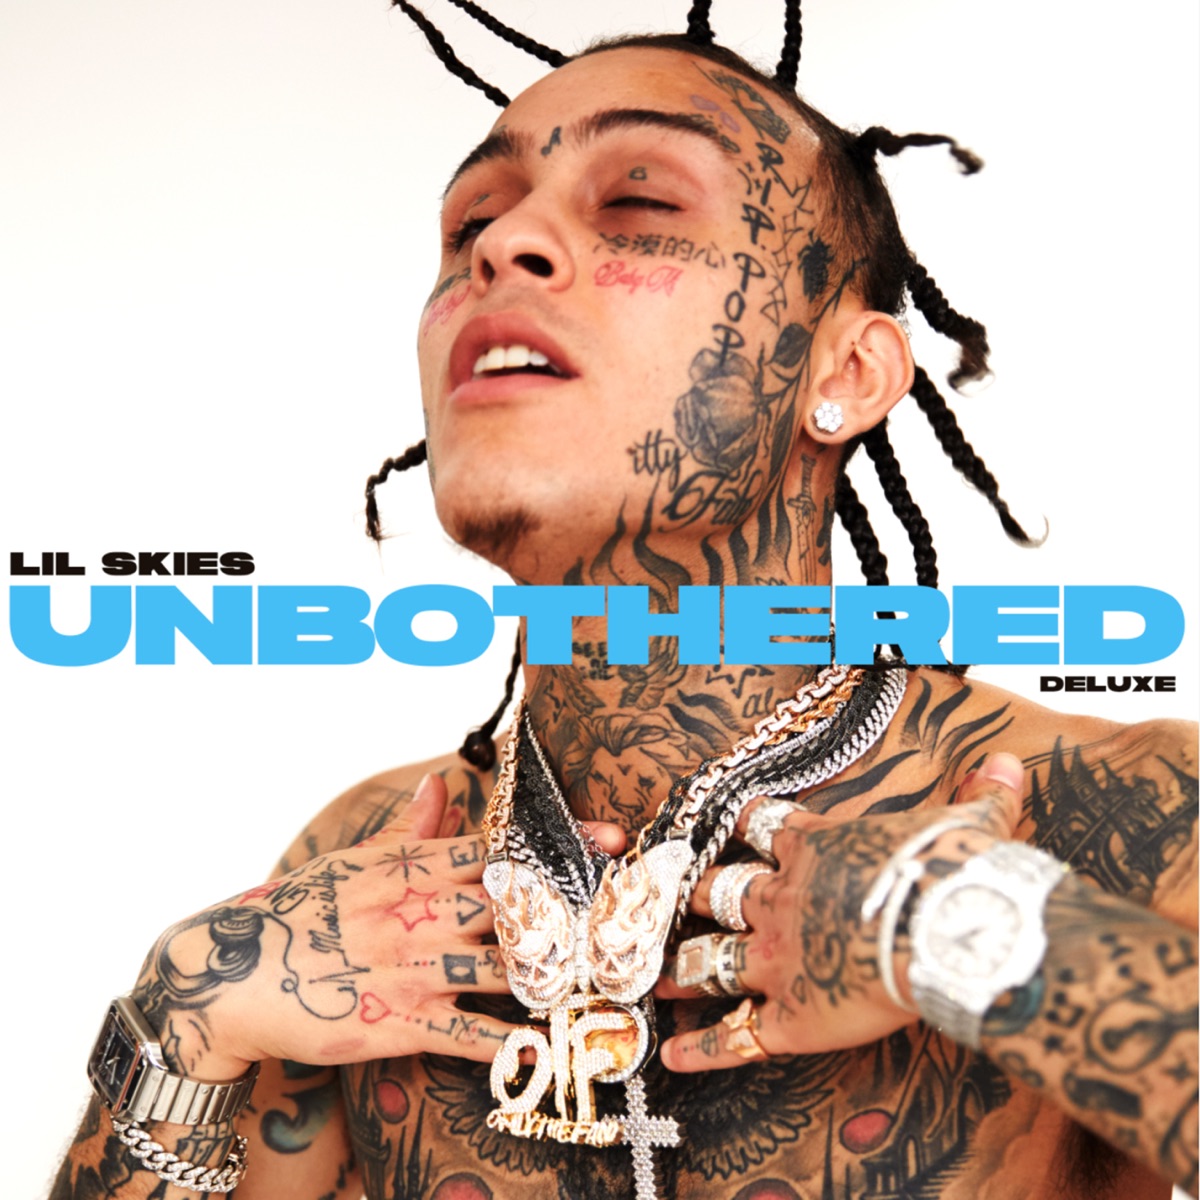 Shelby - Album by Lil Skies - Apple Music